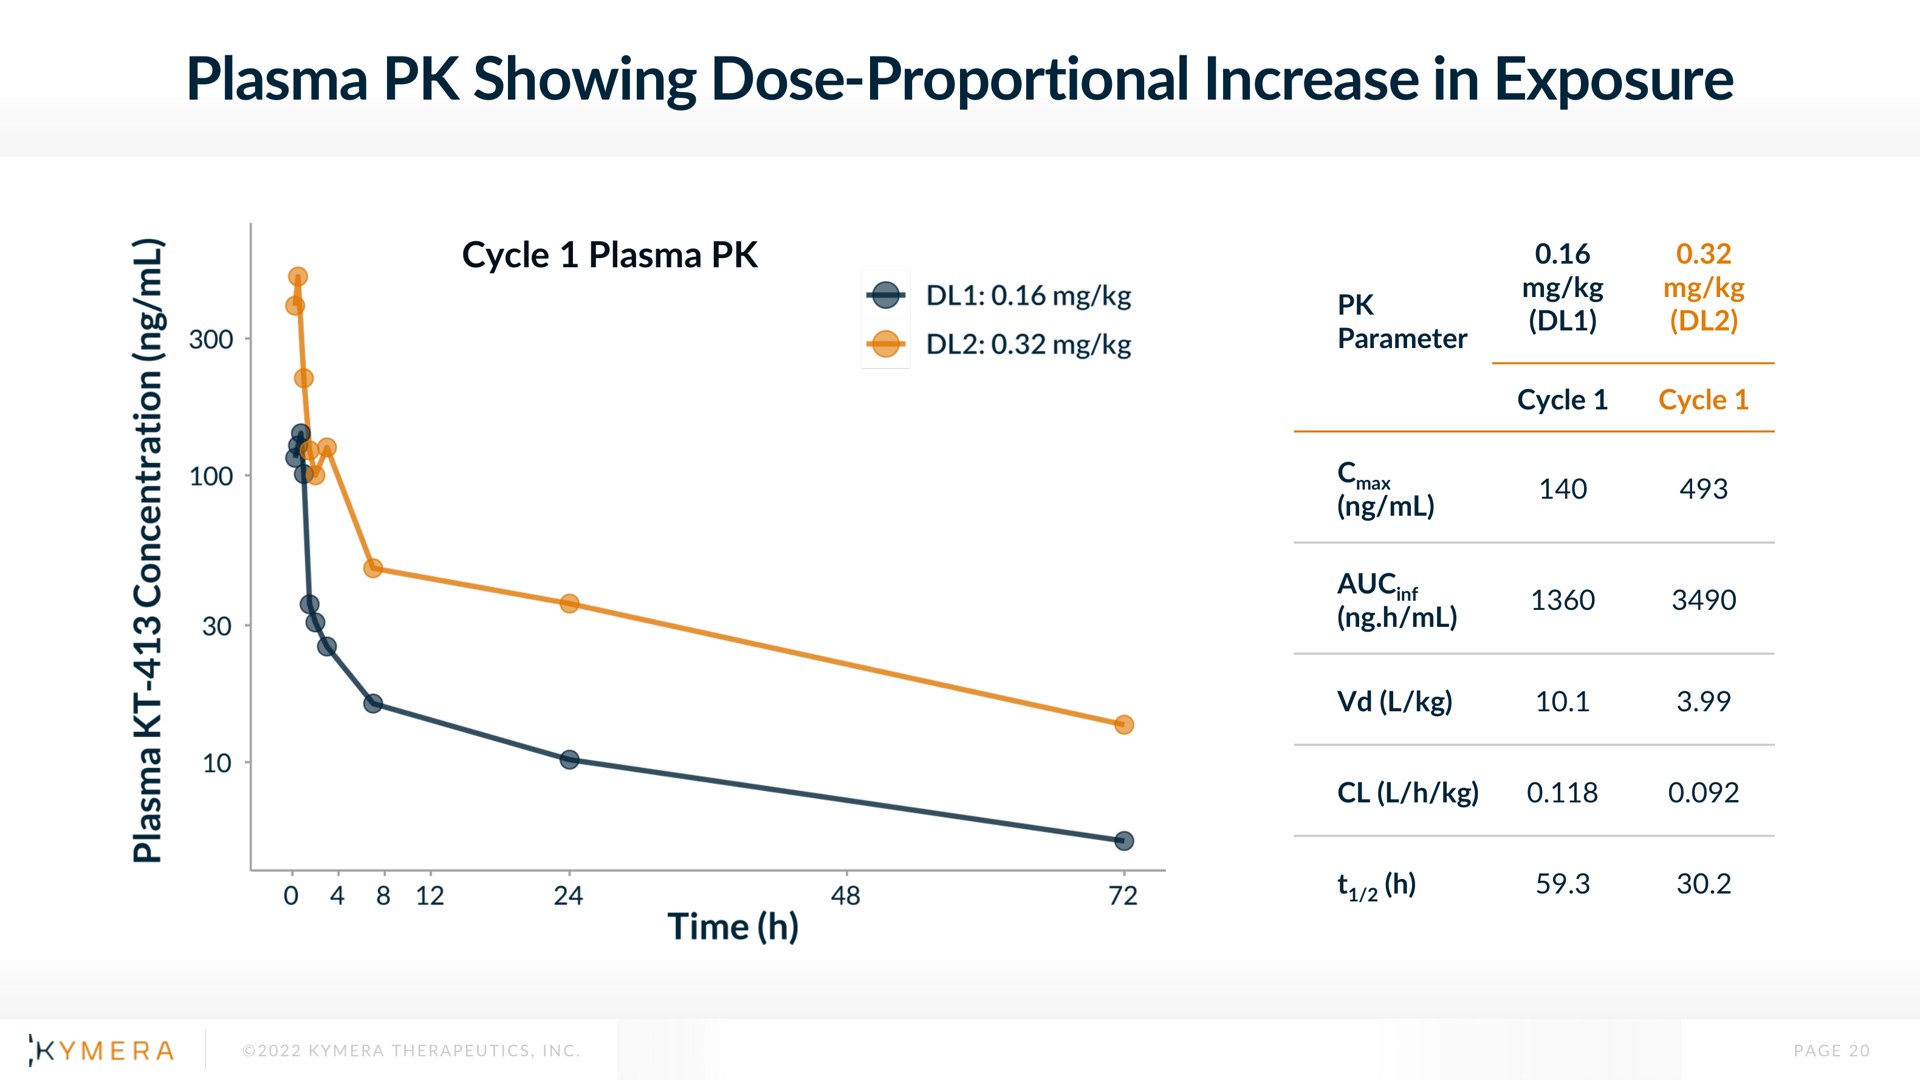 plasma showing dose proportional increase in exposure | Kymera